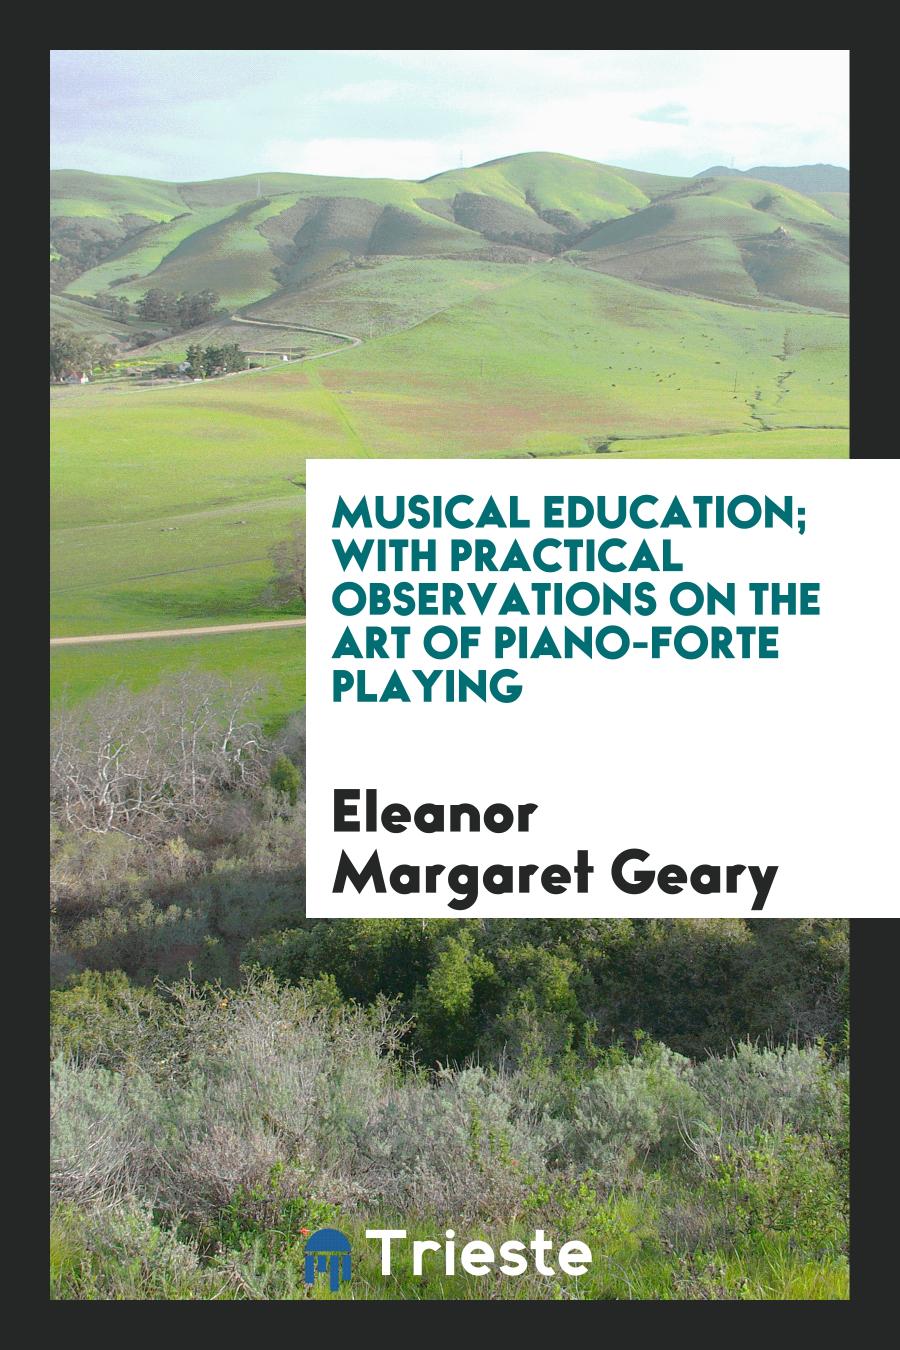 Musical education; with practical observations on the art of piano-forte playing